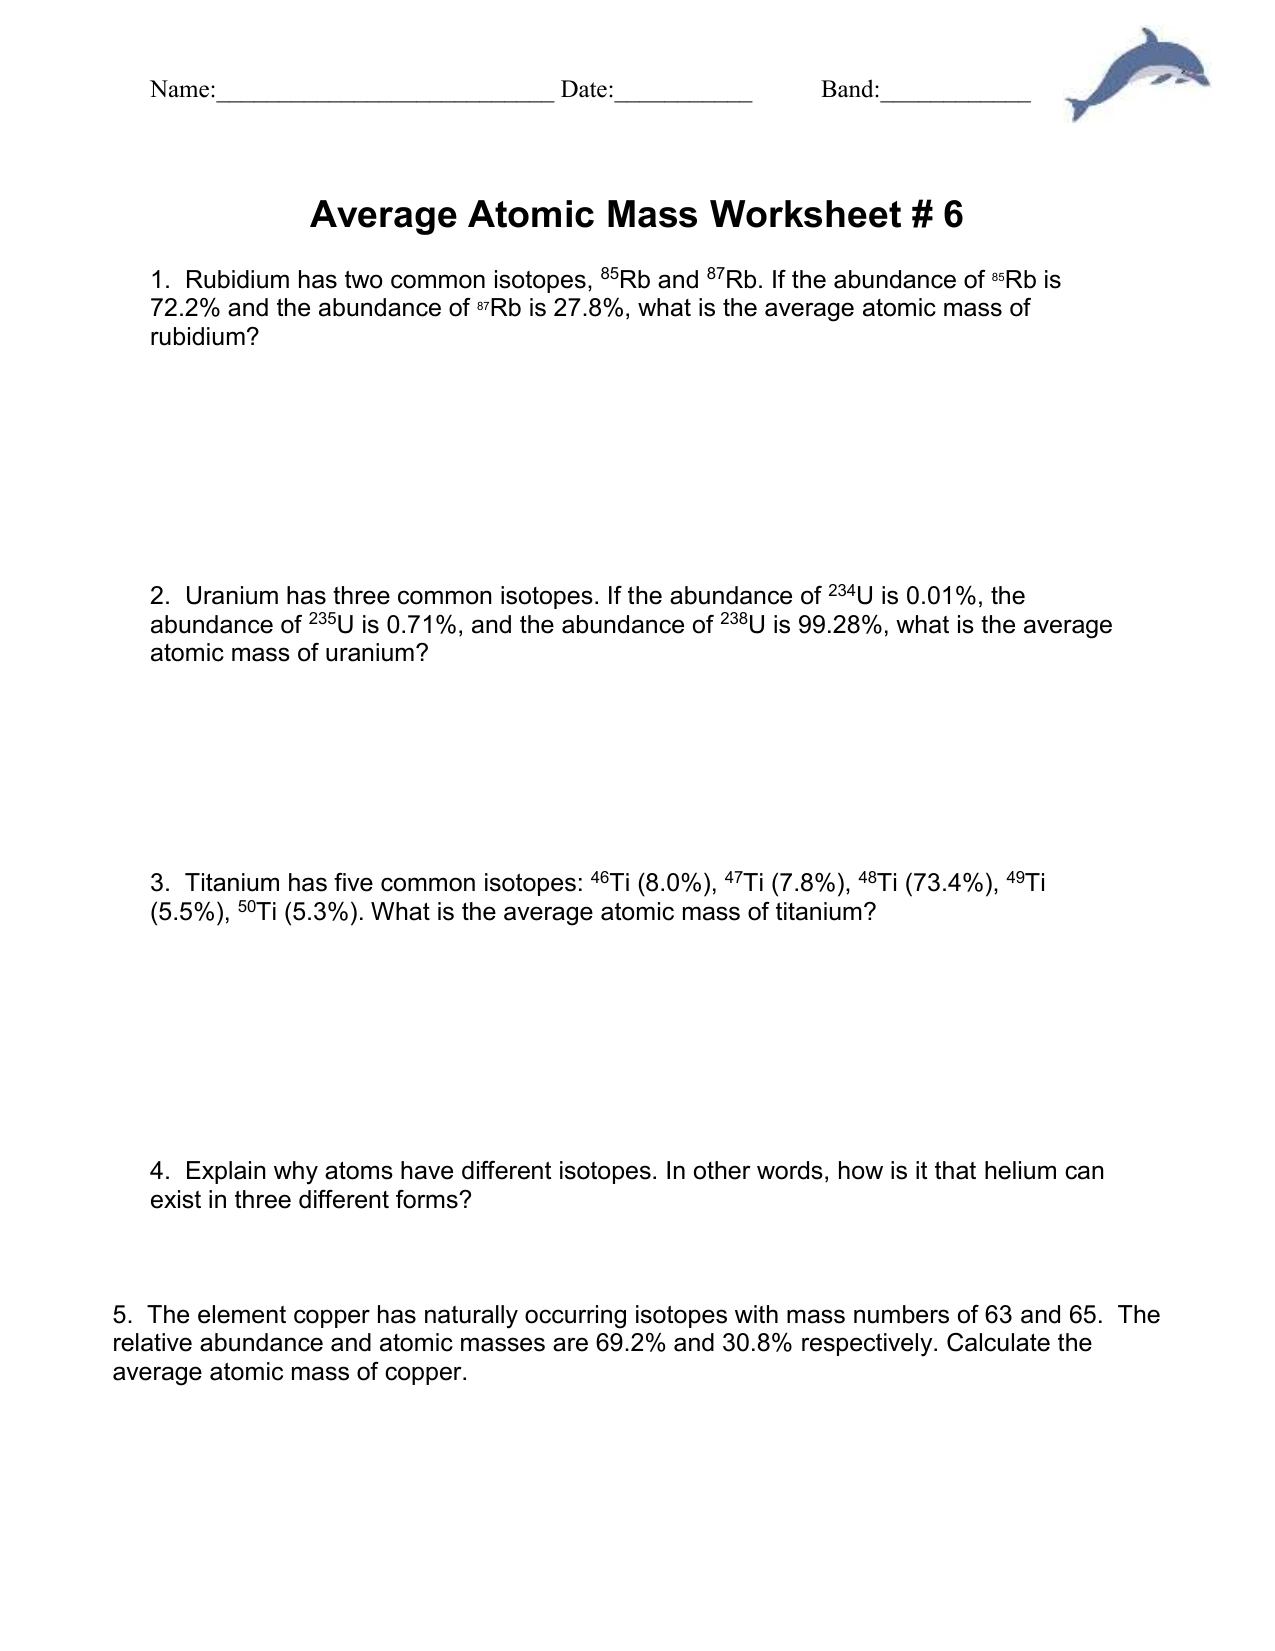 Ch 20 Average atomic mass worksheet Intended For Average Atomic Mass Worksheet